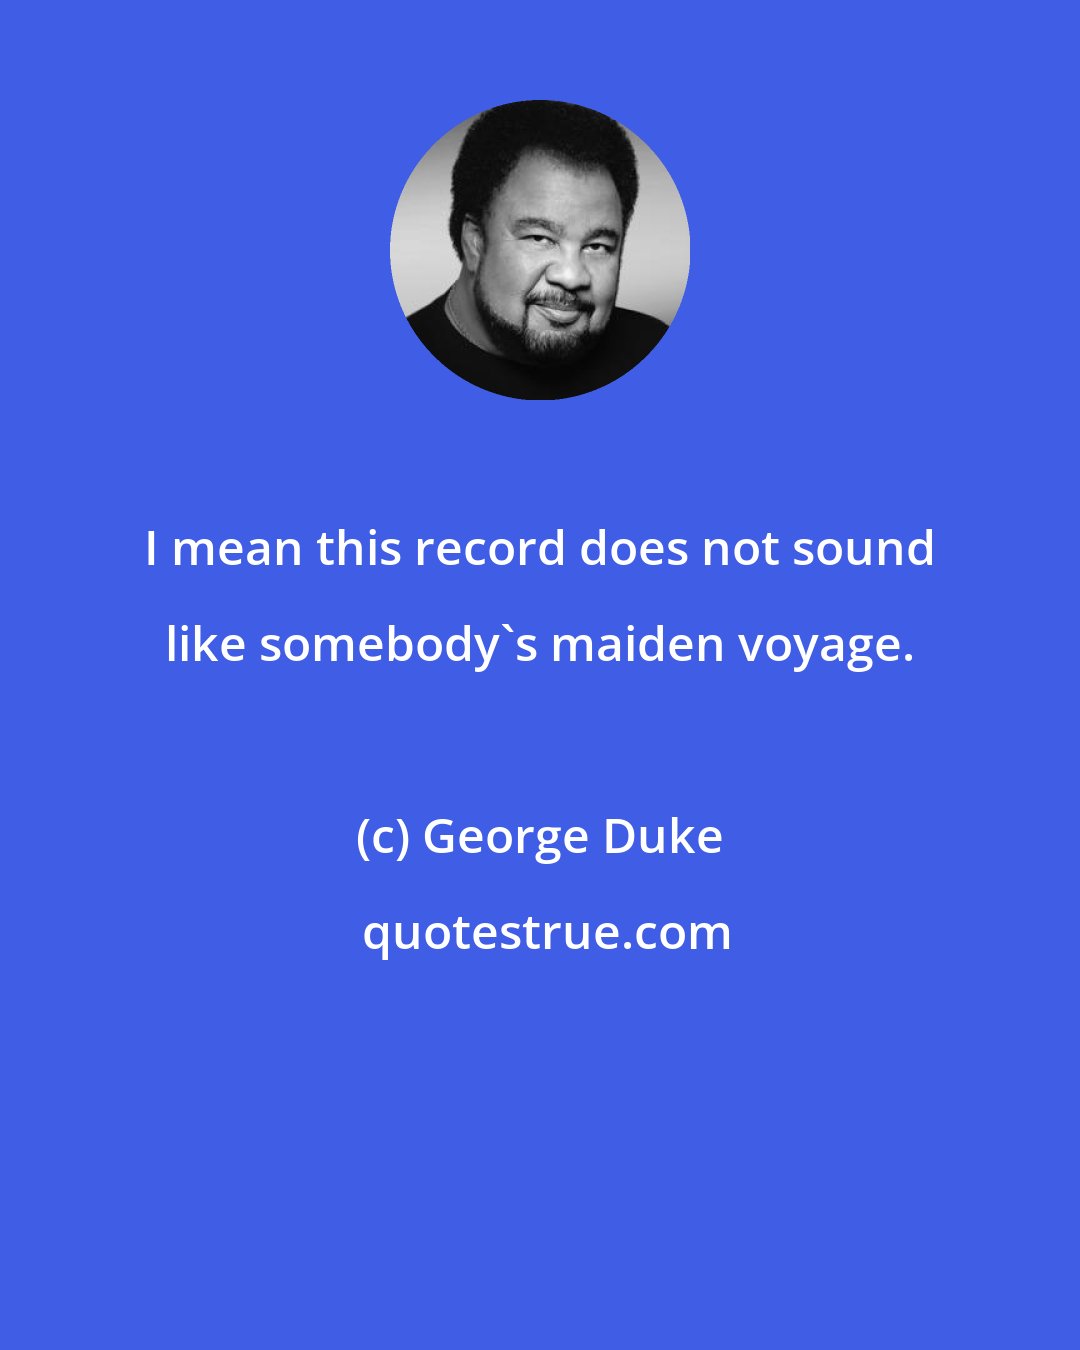 George Duke: I mean this record does not sound like somebody's maiden voyage.